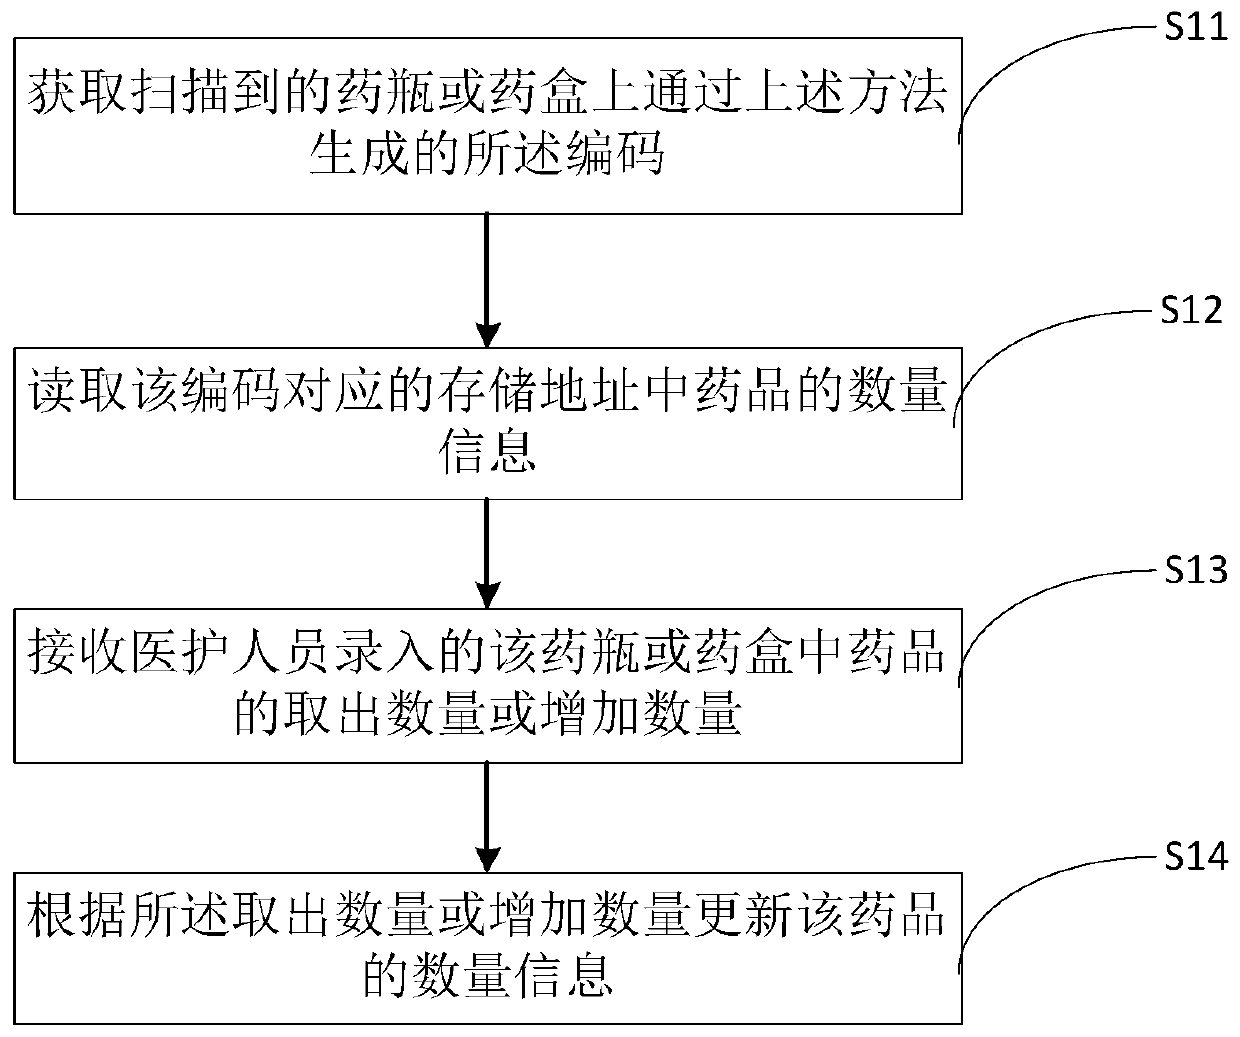 Drug code generation method and system, and drug quantity monitoring method and system